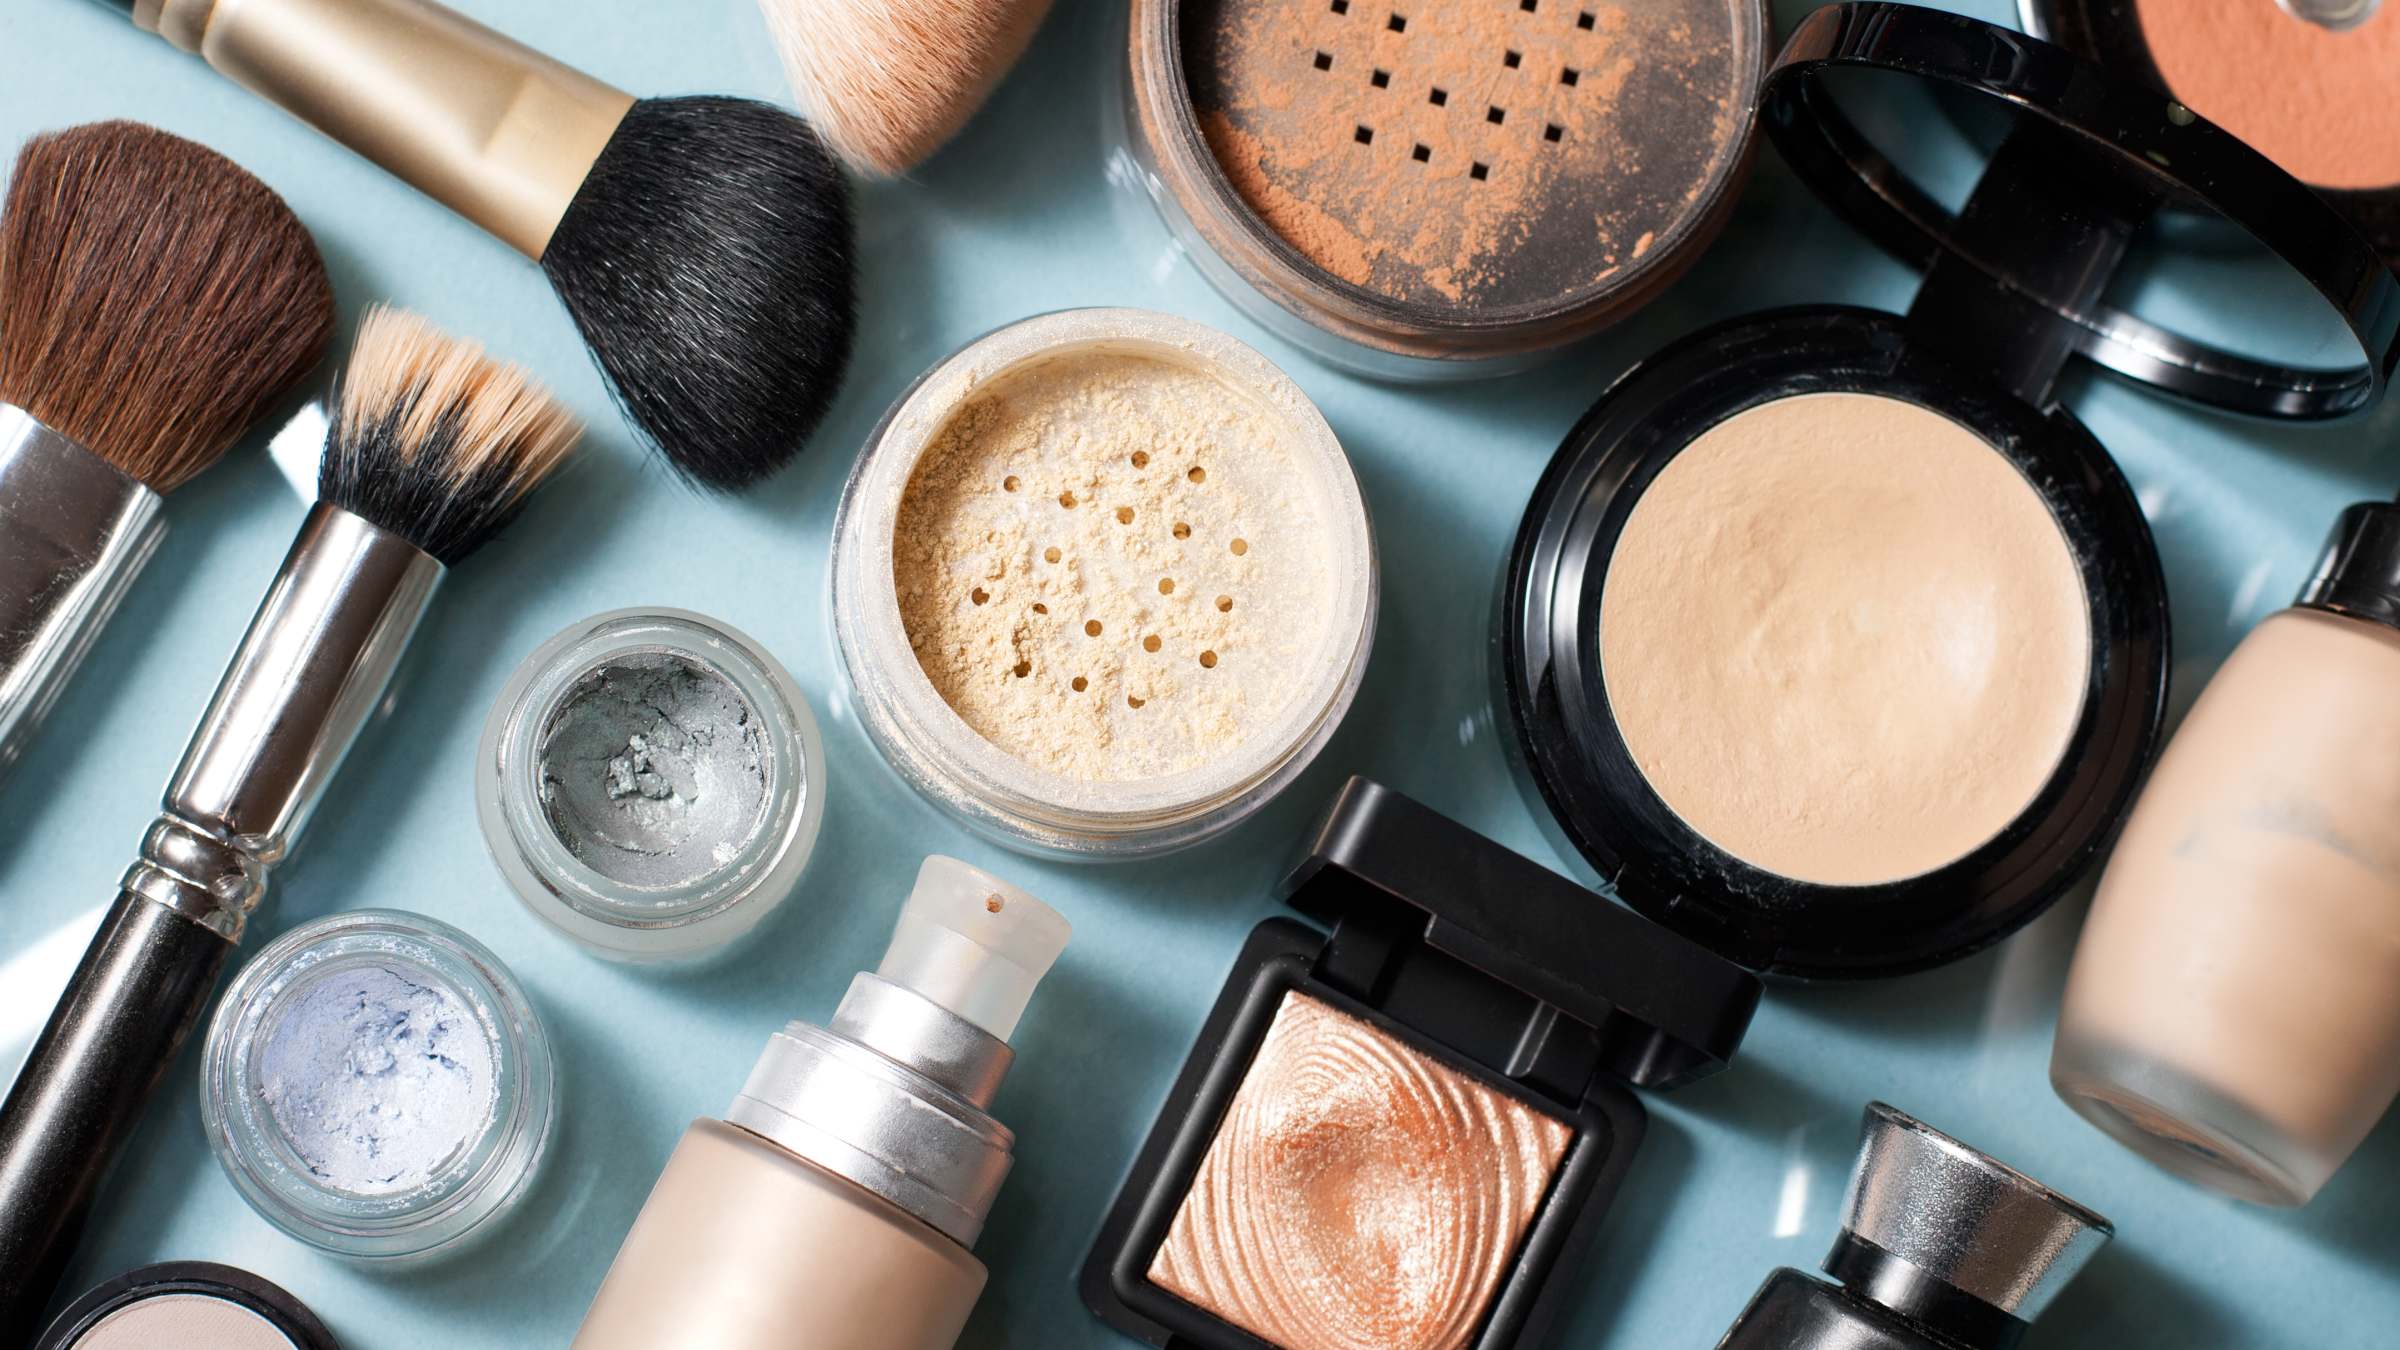 Will Wearing Makeup Every Day Damage Your Skin?